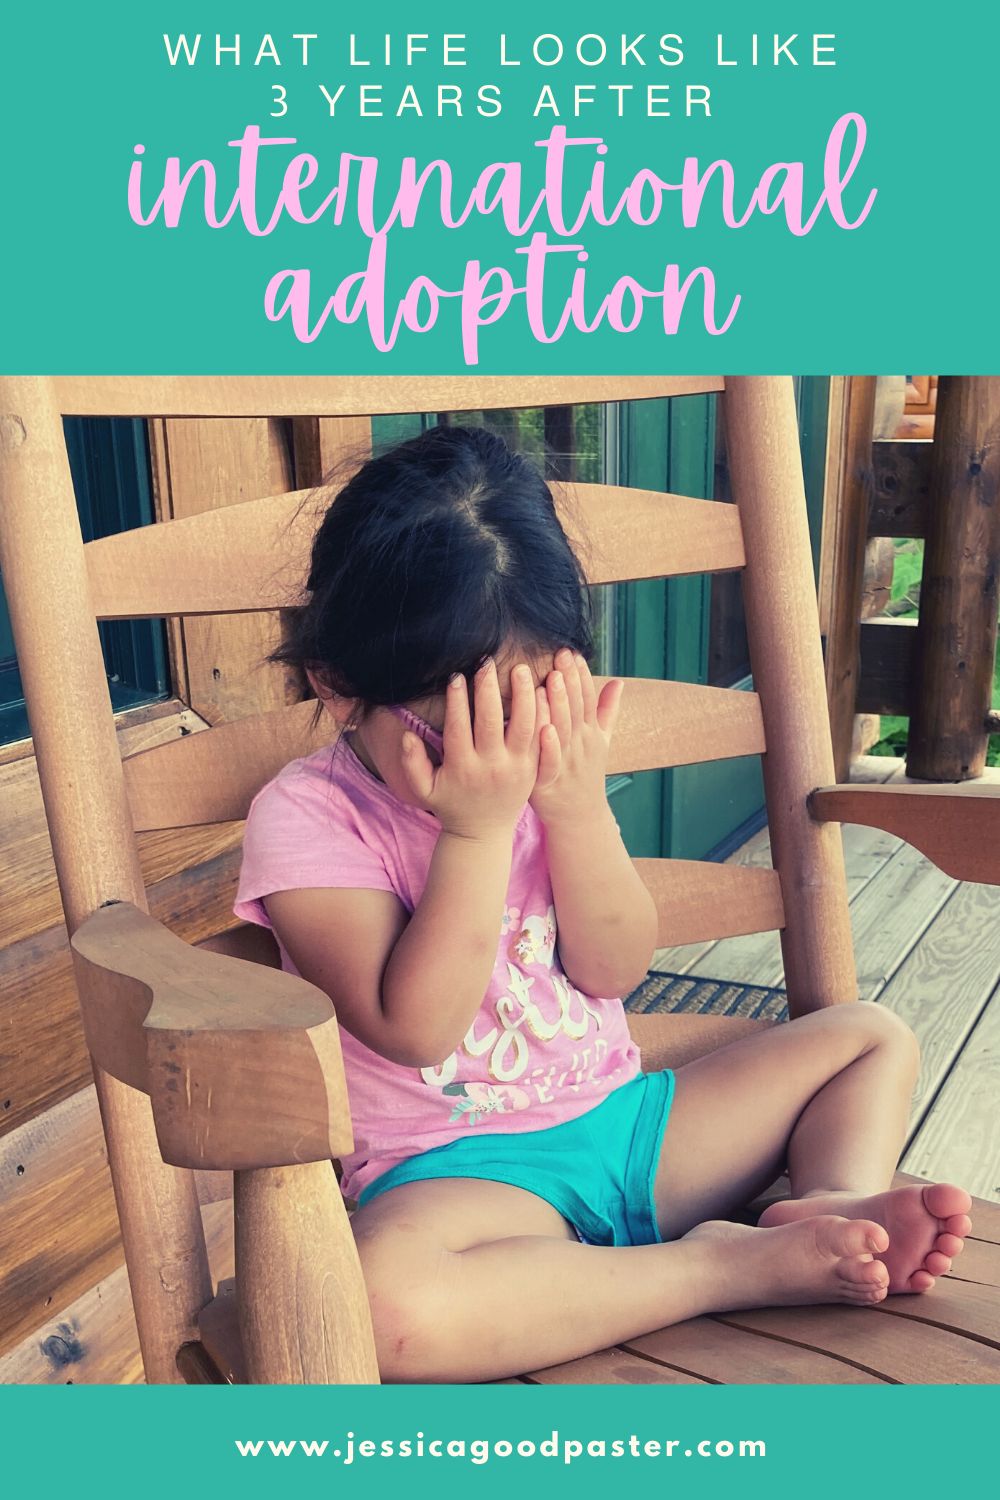 What Life Looks Like 3 Years After International Adoption | Adoption parenting has challenges and blessings that are different than raising biological children. Read this mom's reflection on life three years after her international adoption journey. Part two of this series includes food issues, attachment and trauma, life and family, navigating transracial adoption, and parenting on faith. #adoption #chinaadoption #adoptionjourney #gotchaday #parenting #internationaladoption